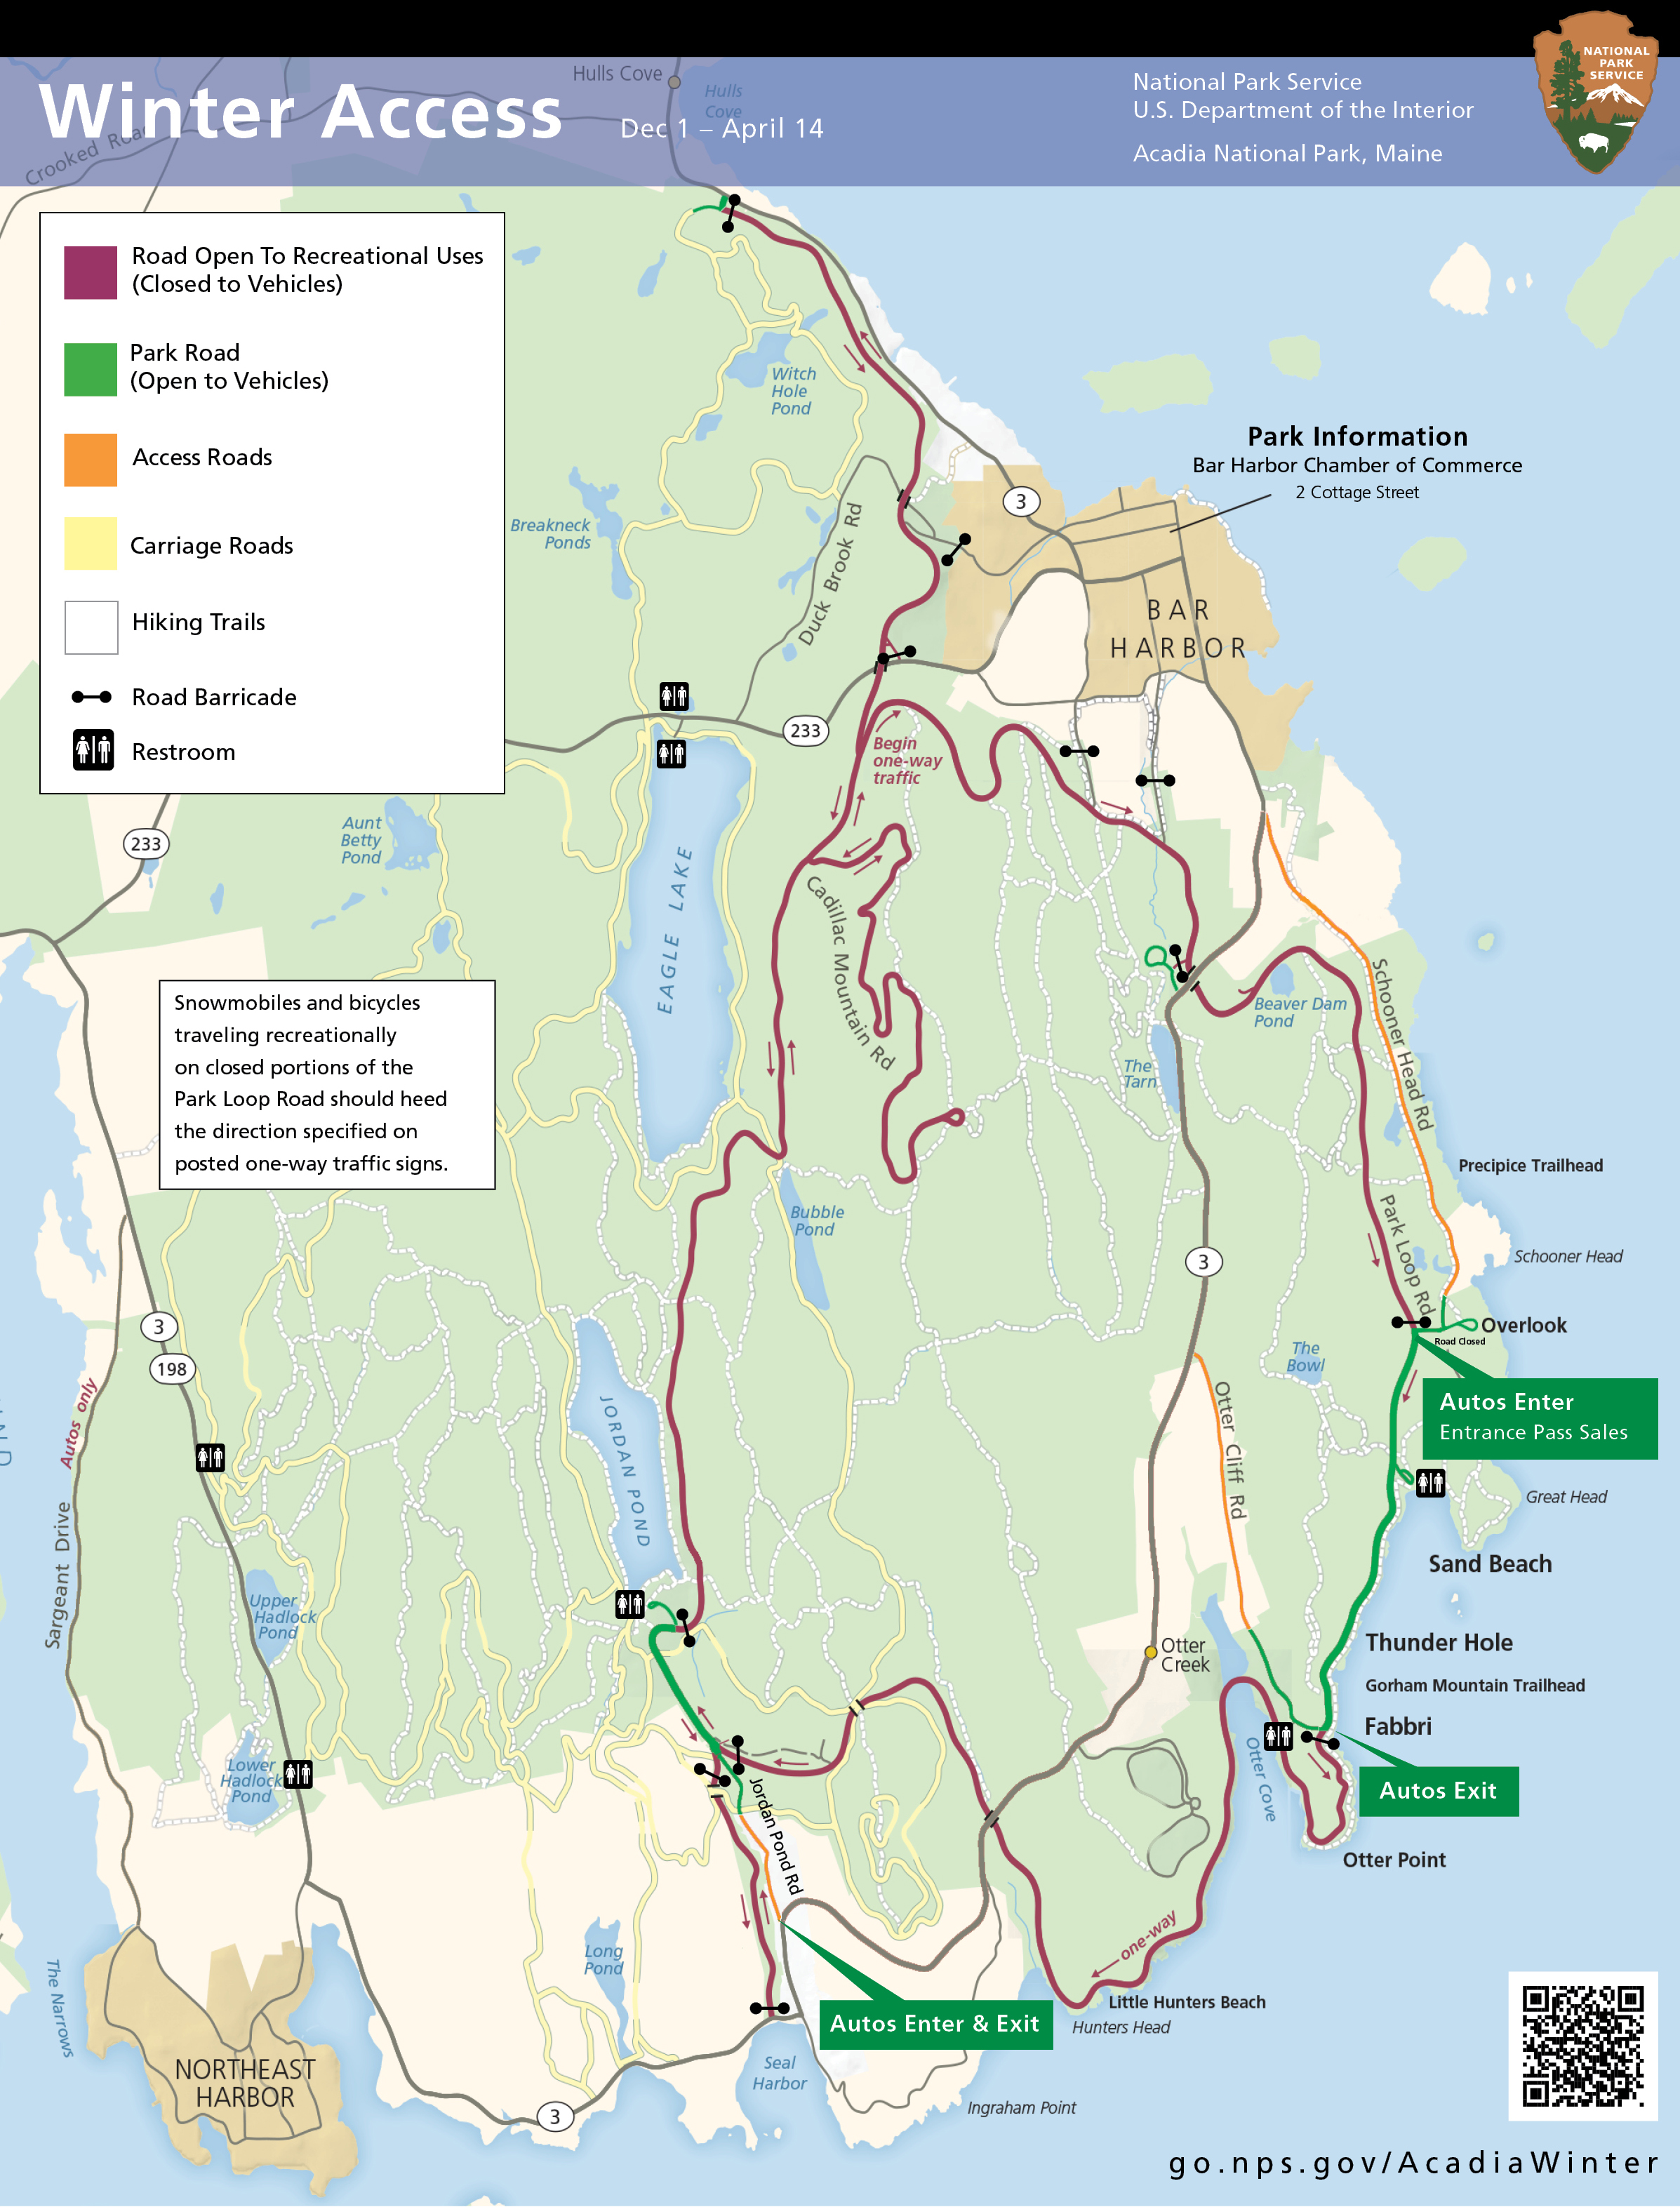 Simplified Map Showing Locations Of Visitor Centers, Roads, And Campgrounds - Simplified map showing locations of visitor centers, roads, and campgrounds